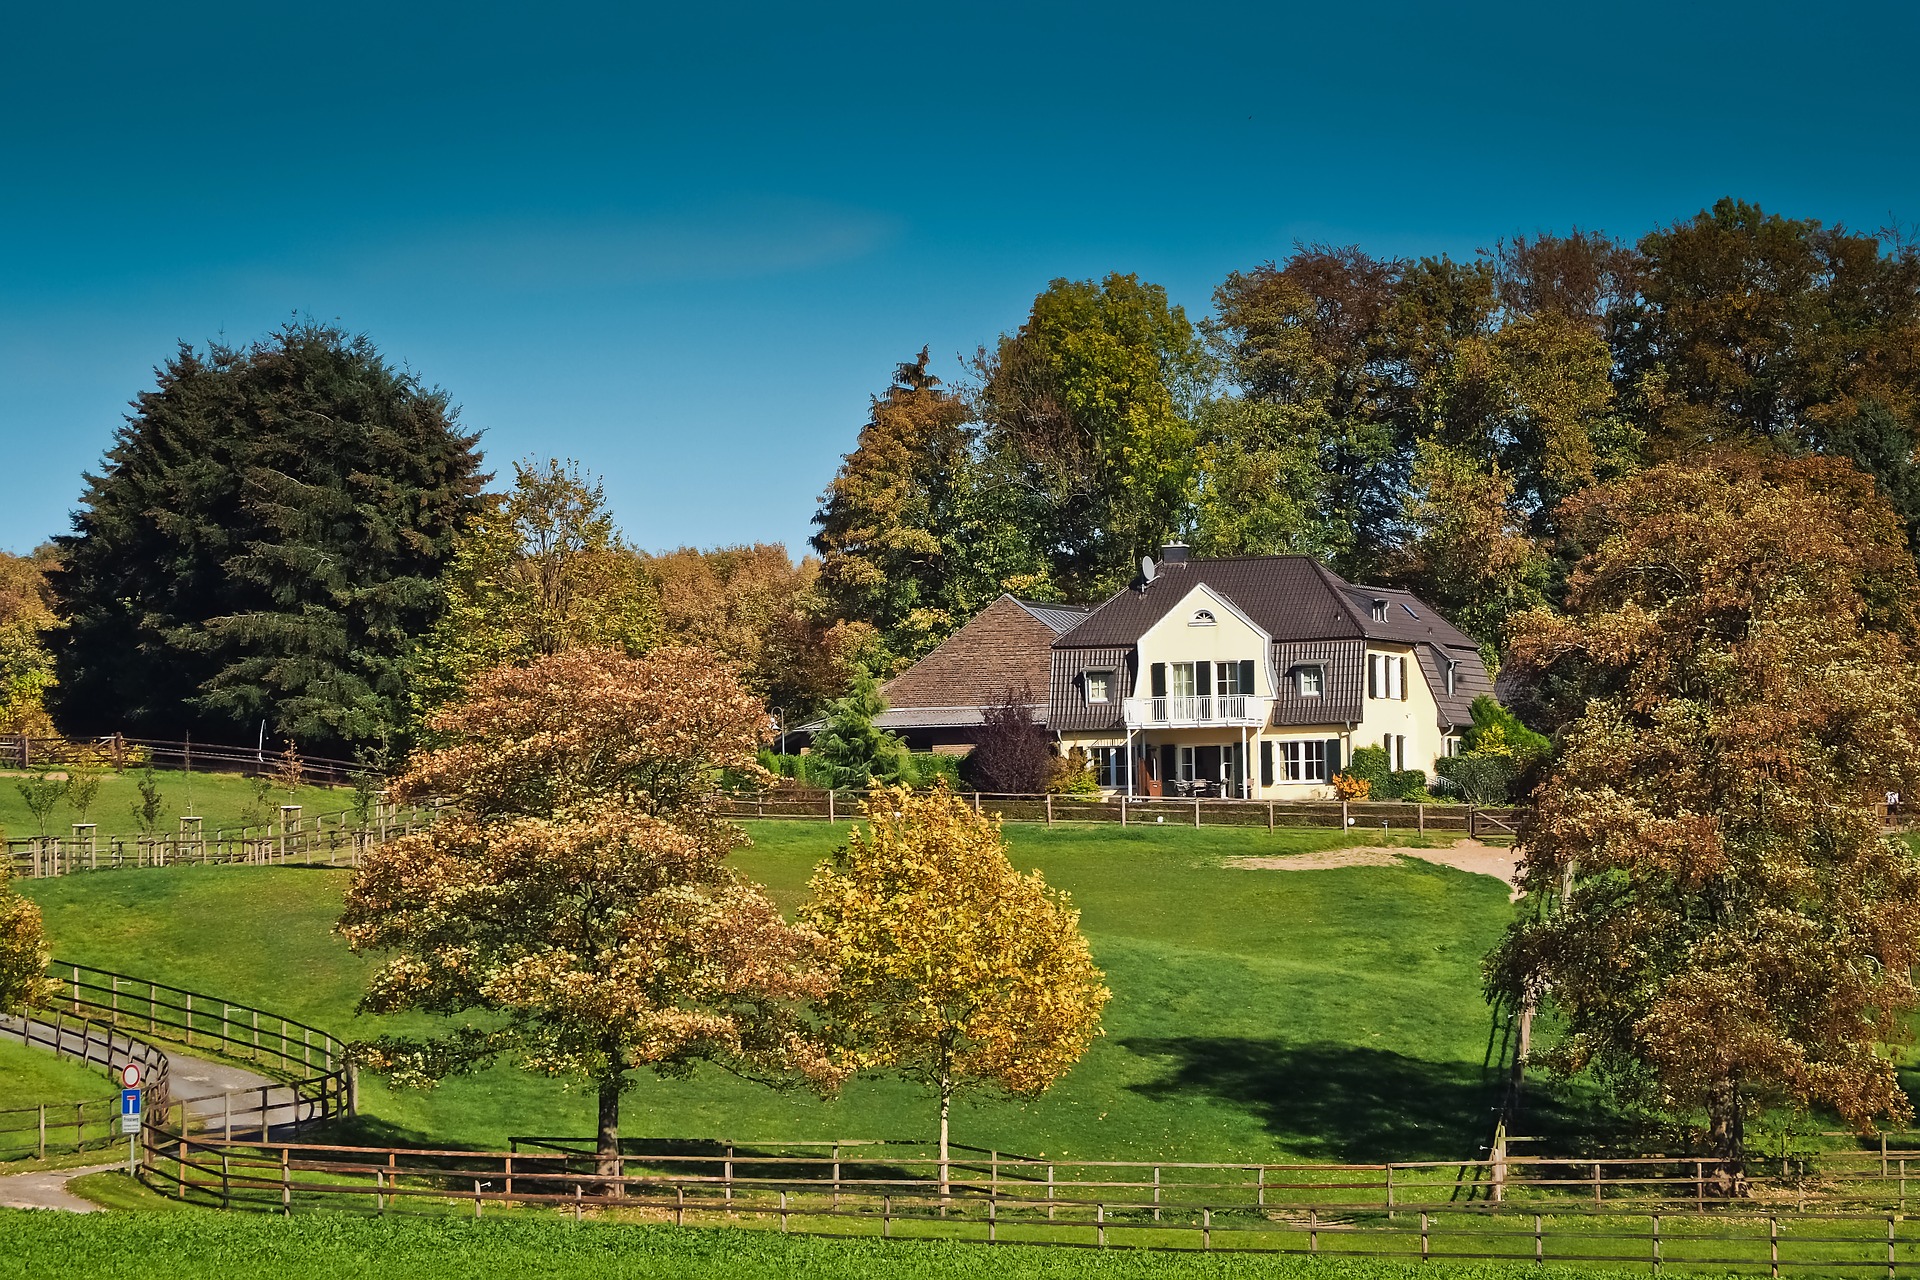 5 Important Factors for Financing A Rural Home or Acreage